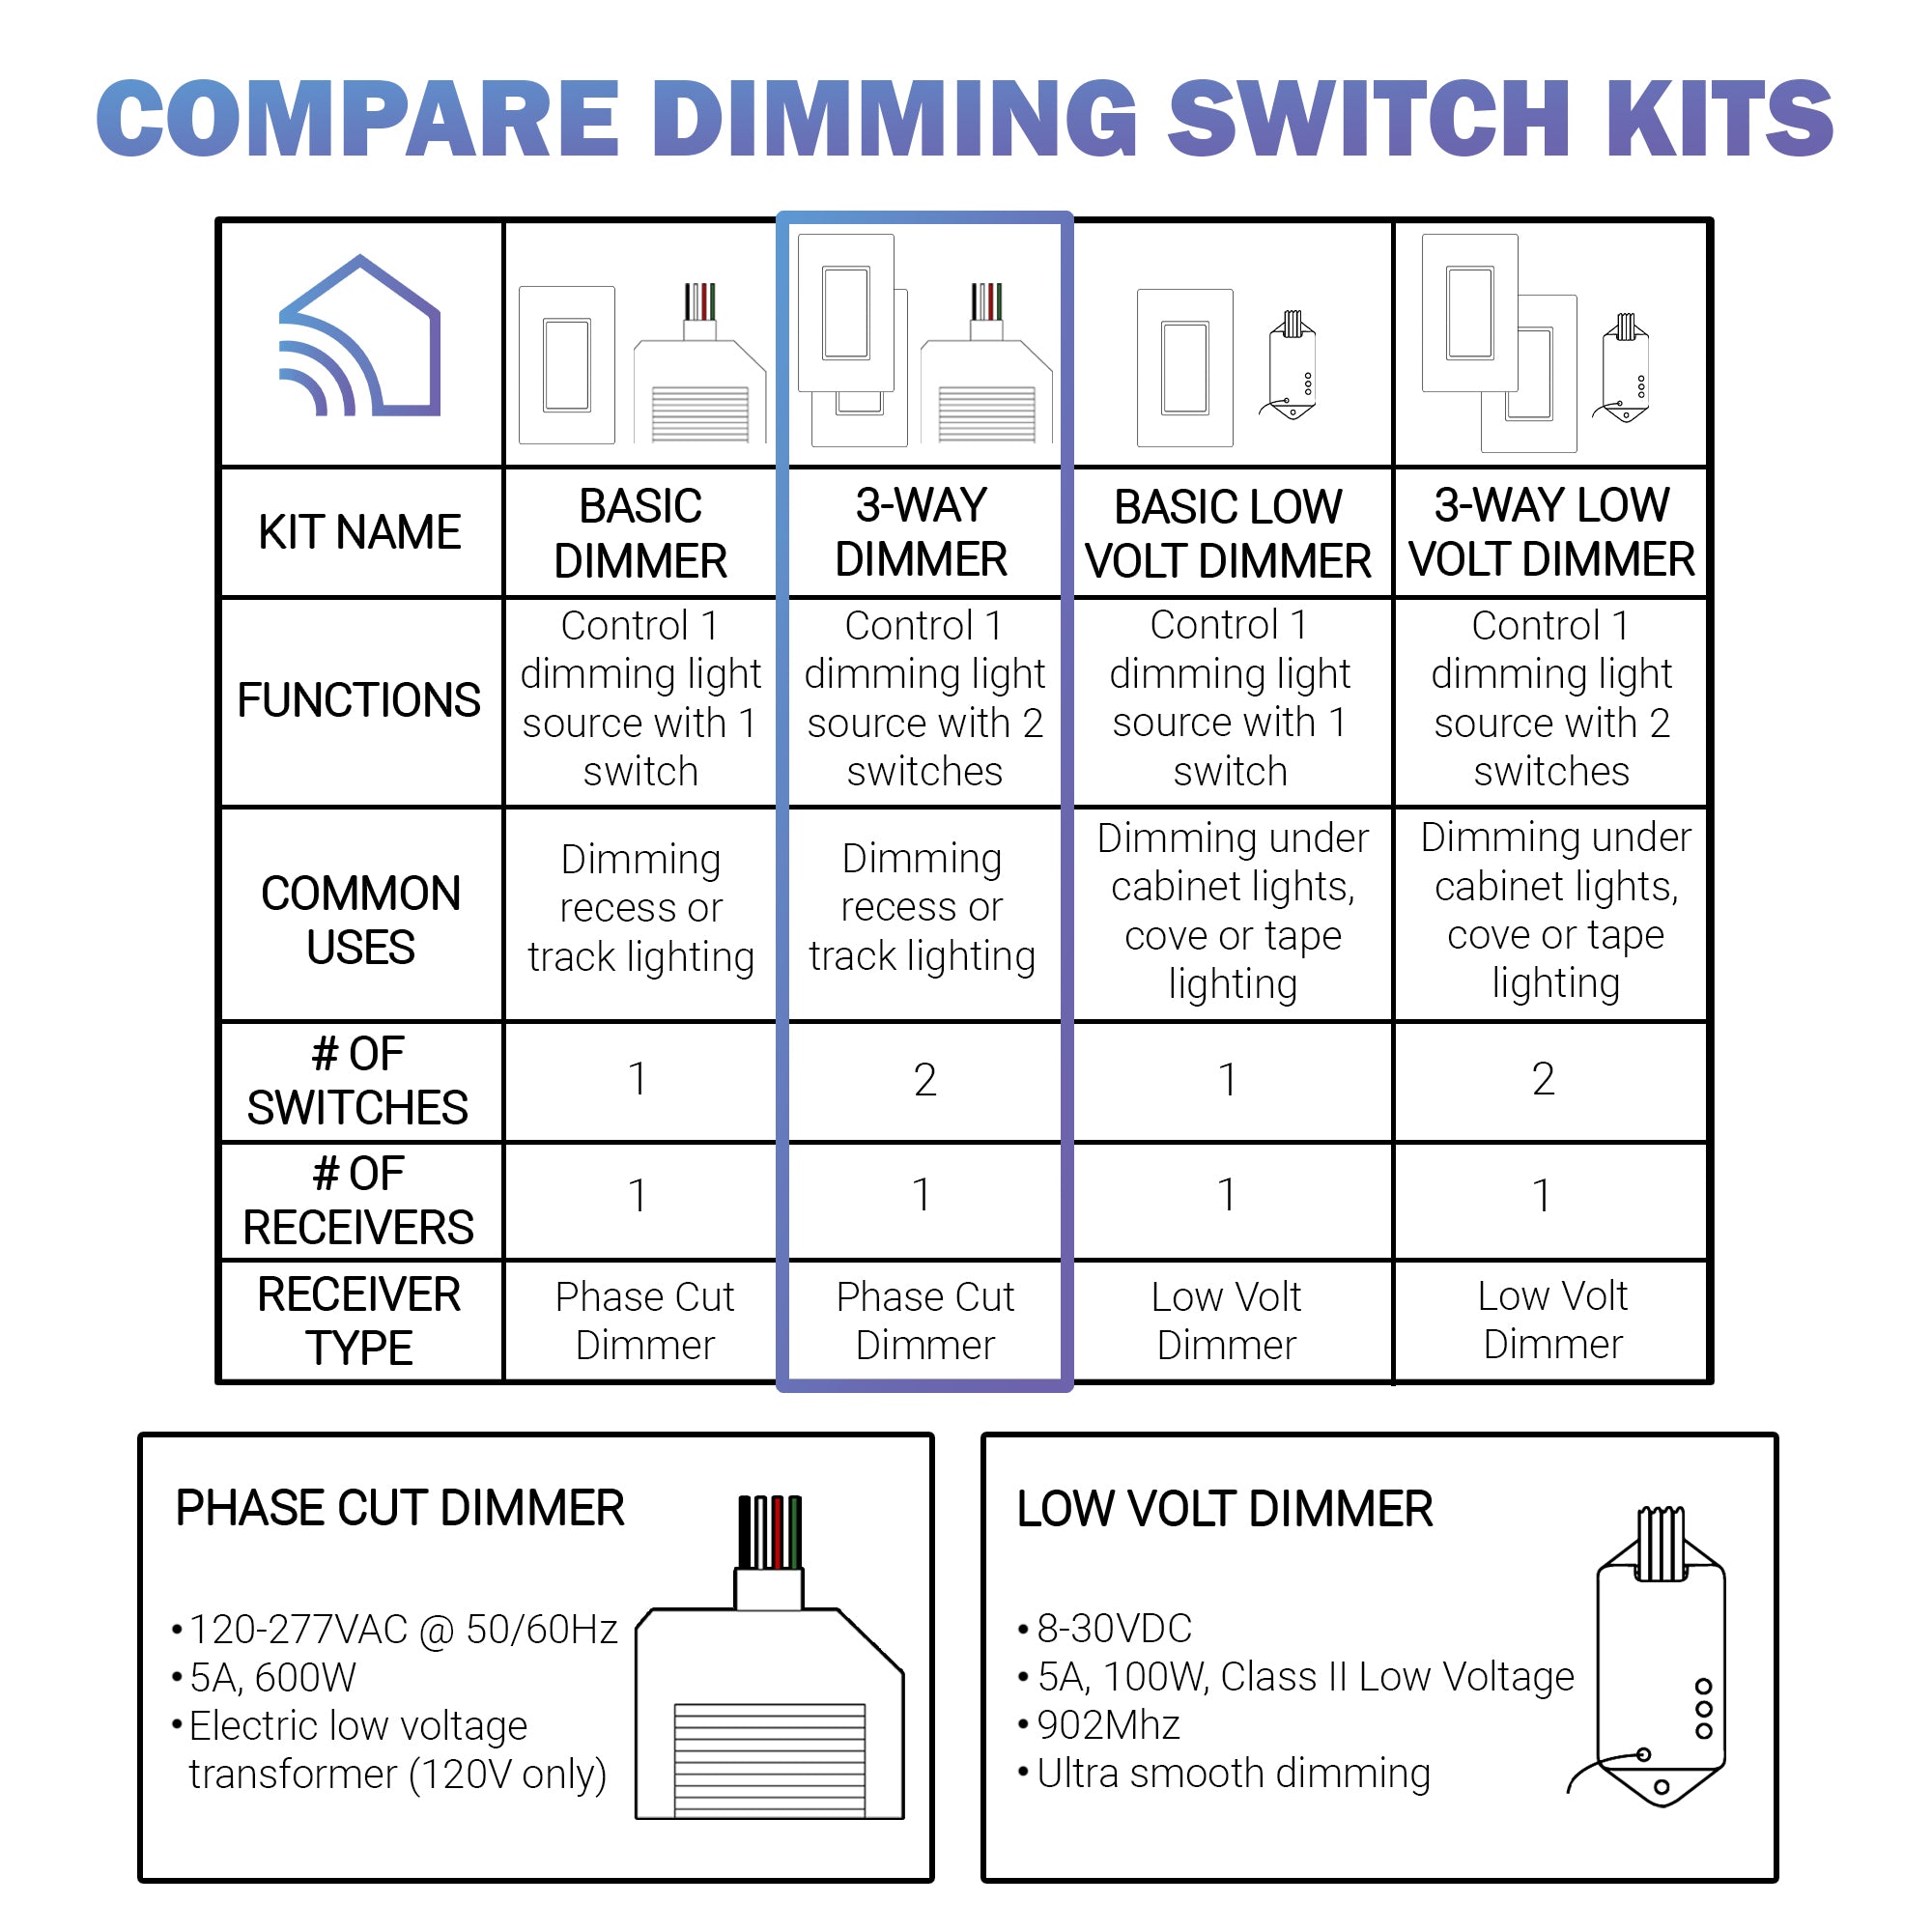 3-WAY DIMMER KIT: 1 DIMMING RECEIVER, 2 SWITCHES